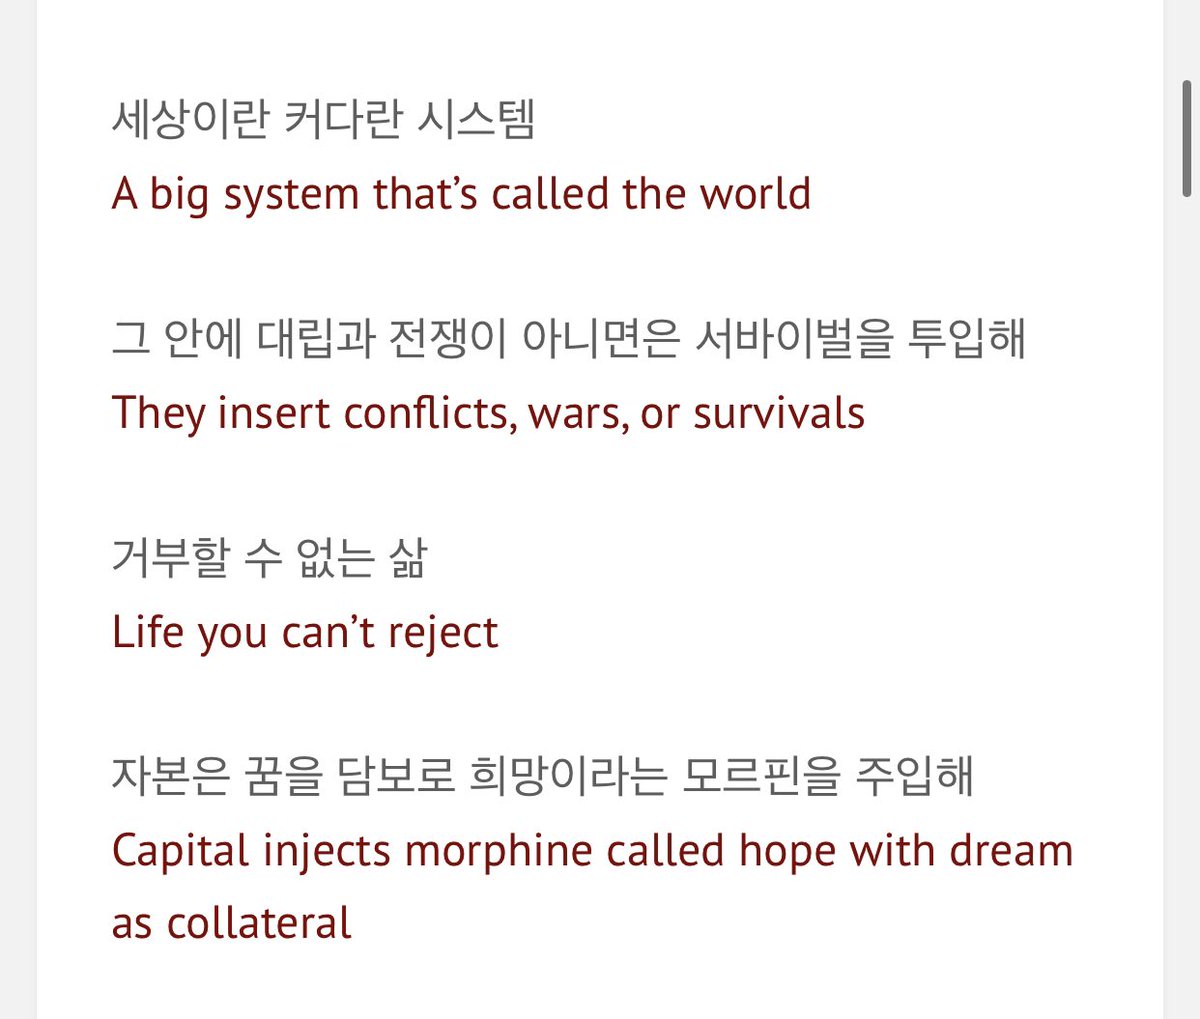 yoongi doesn’t address you directly he makes a statement about the way the world is right now, and he delivers his verse as if he was a bit out of breath, inhales at the end of each bar (and we know hes mastered the use of his breath to strengthen his storytelling)